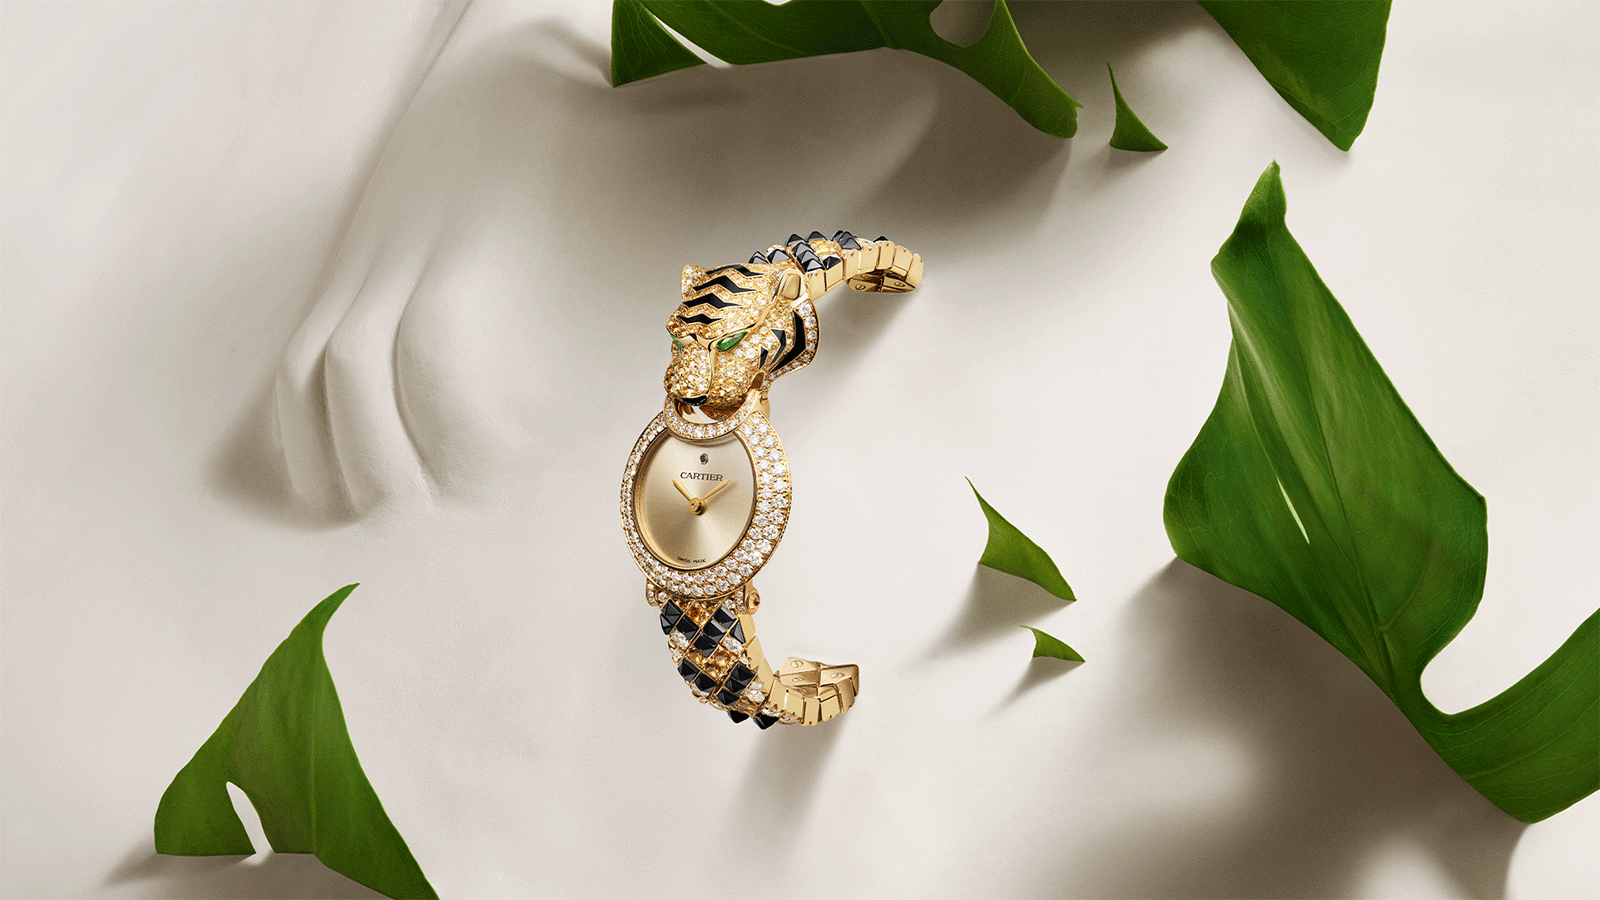 Cartier's Animal Jewelry timepiece featuring a tiger motif and a bracelet adorned with gemstones.